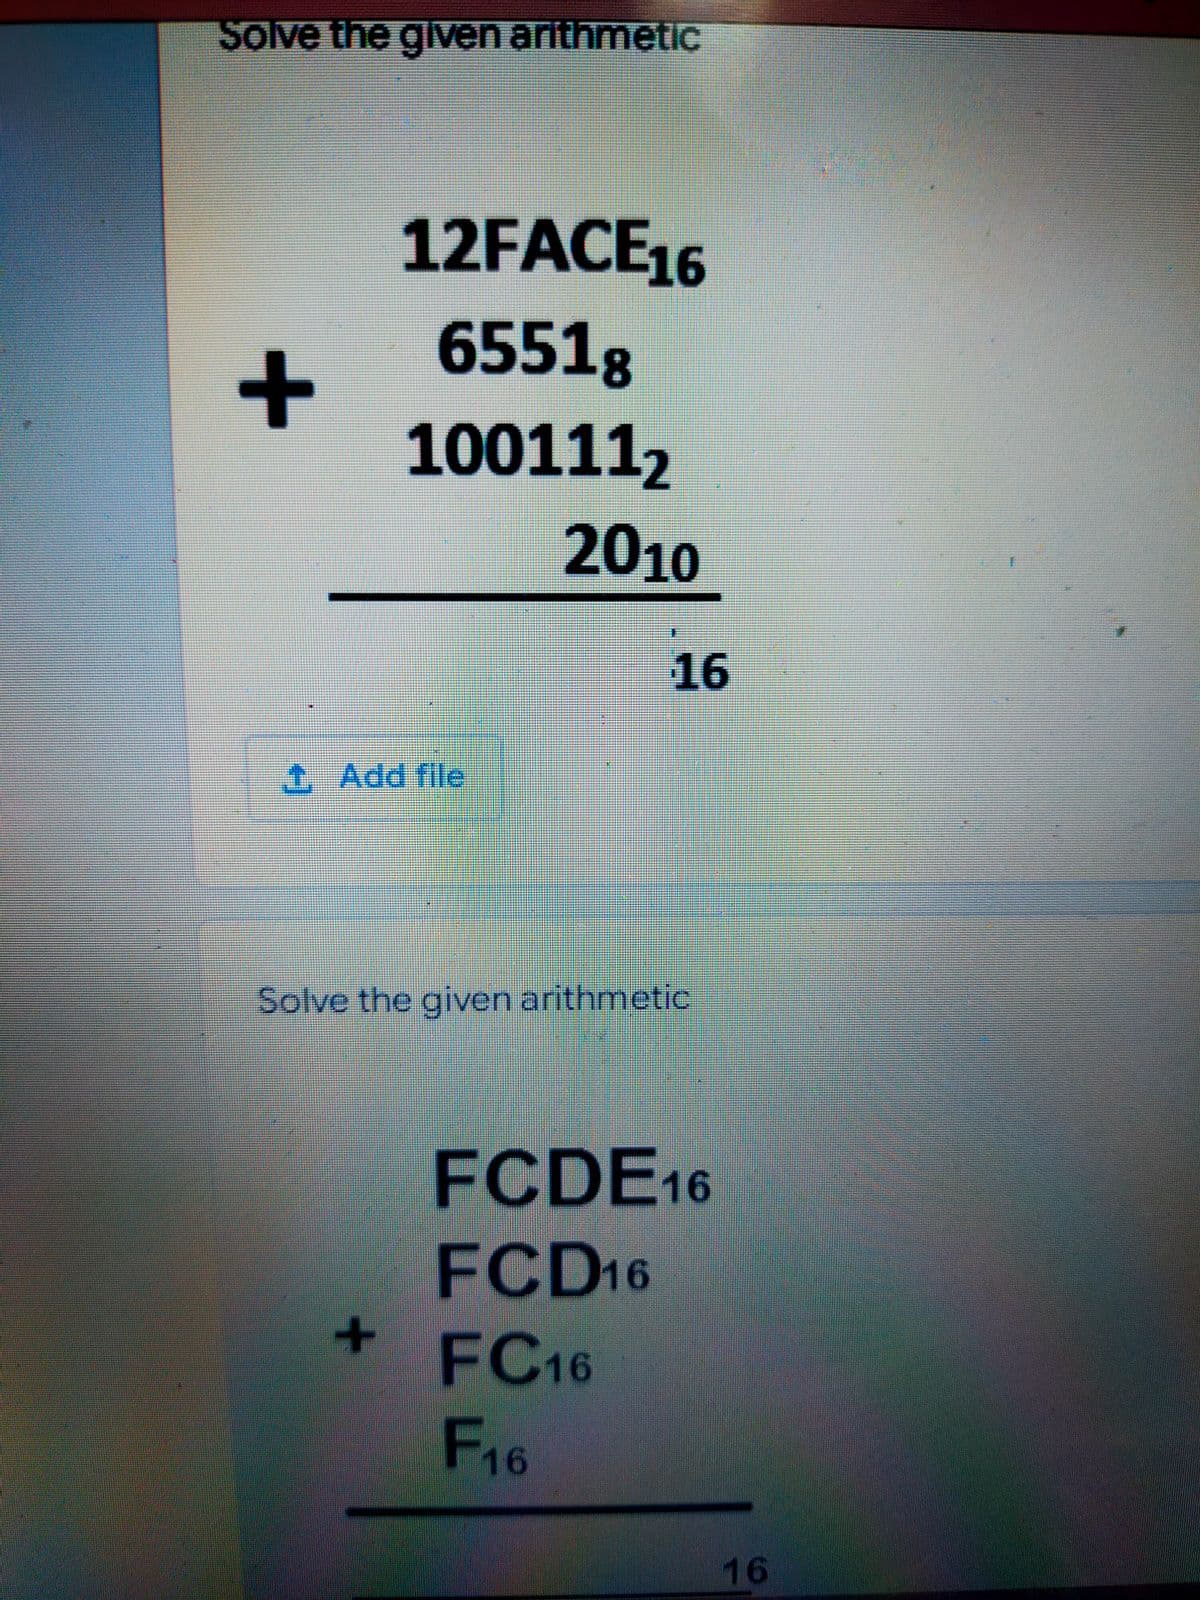 Solve the given arithmetic
12FACE16
6551g
+
1001112
2010
16
1 Add file
Solve the given arithmetic
FCDE16
FCD16
FC16
16
16
